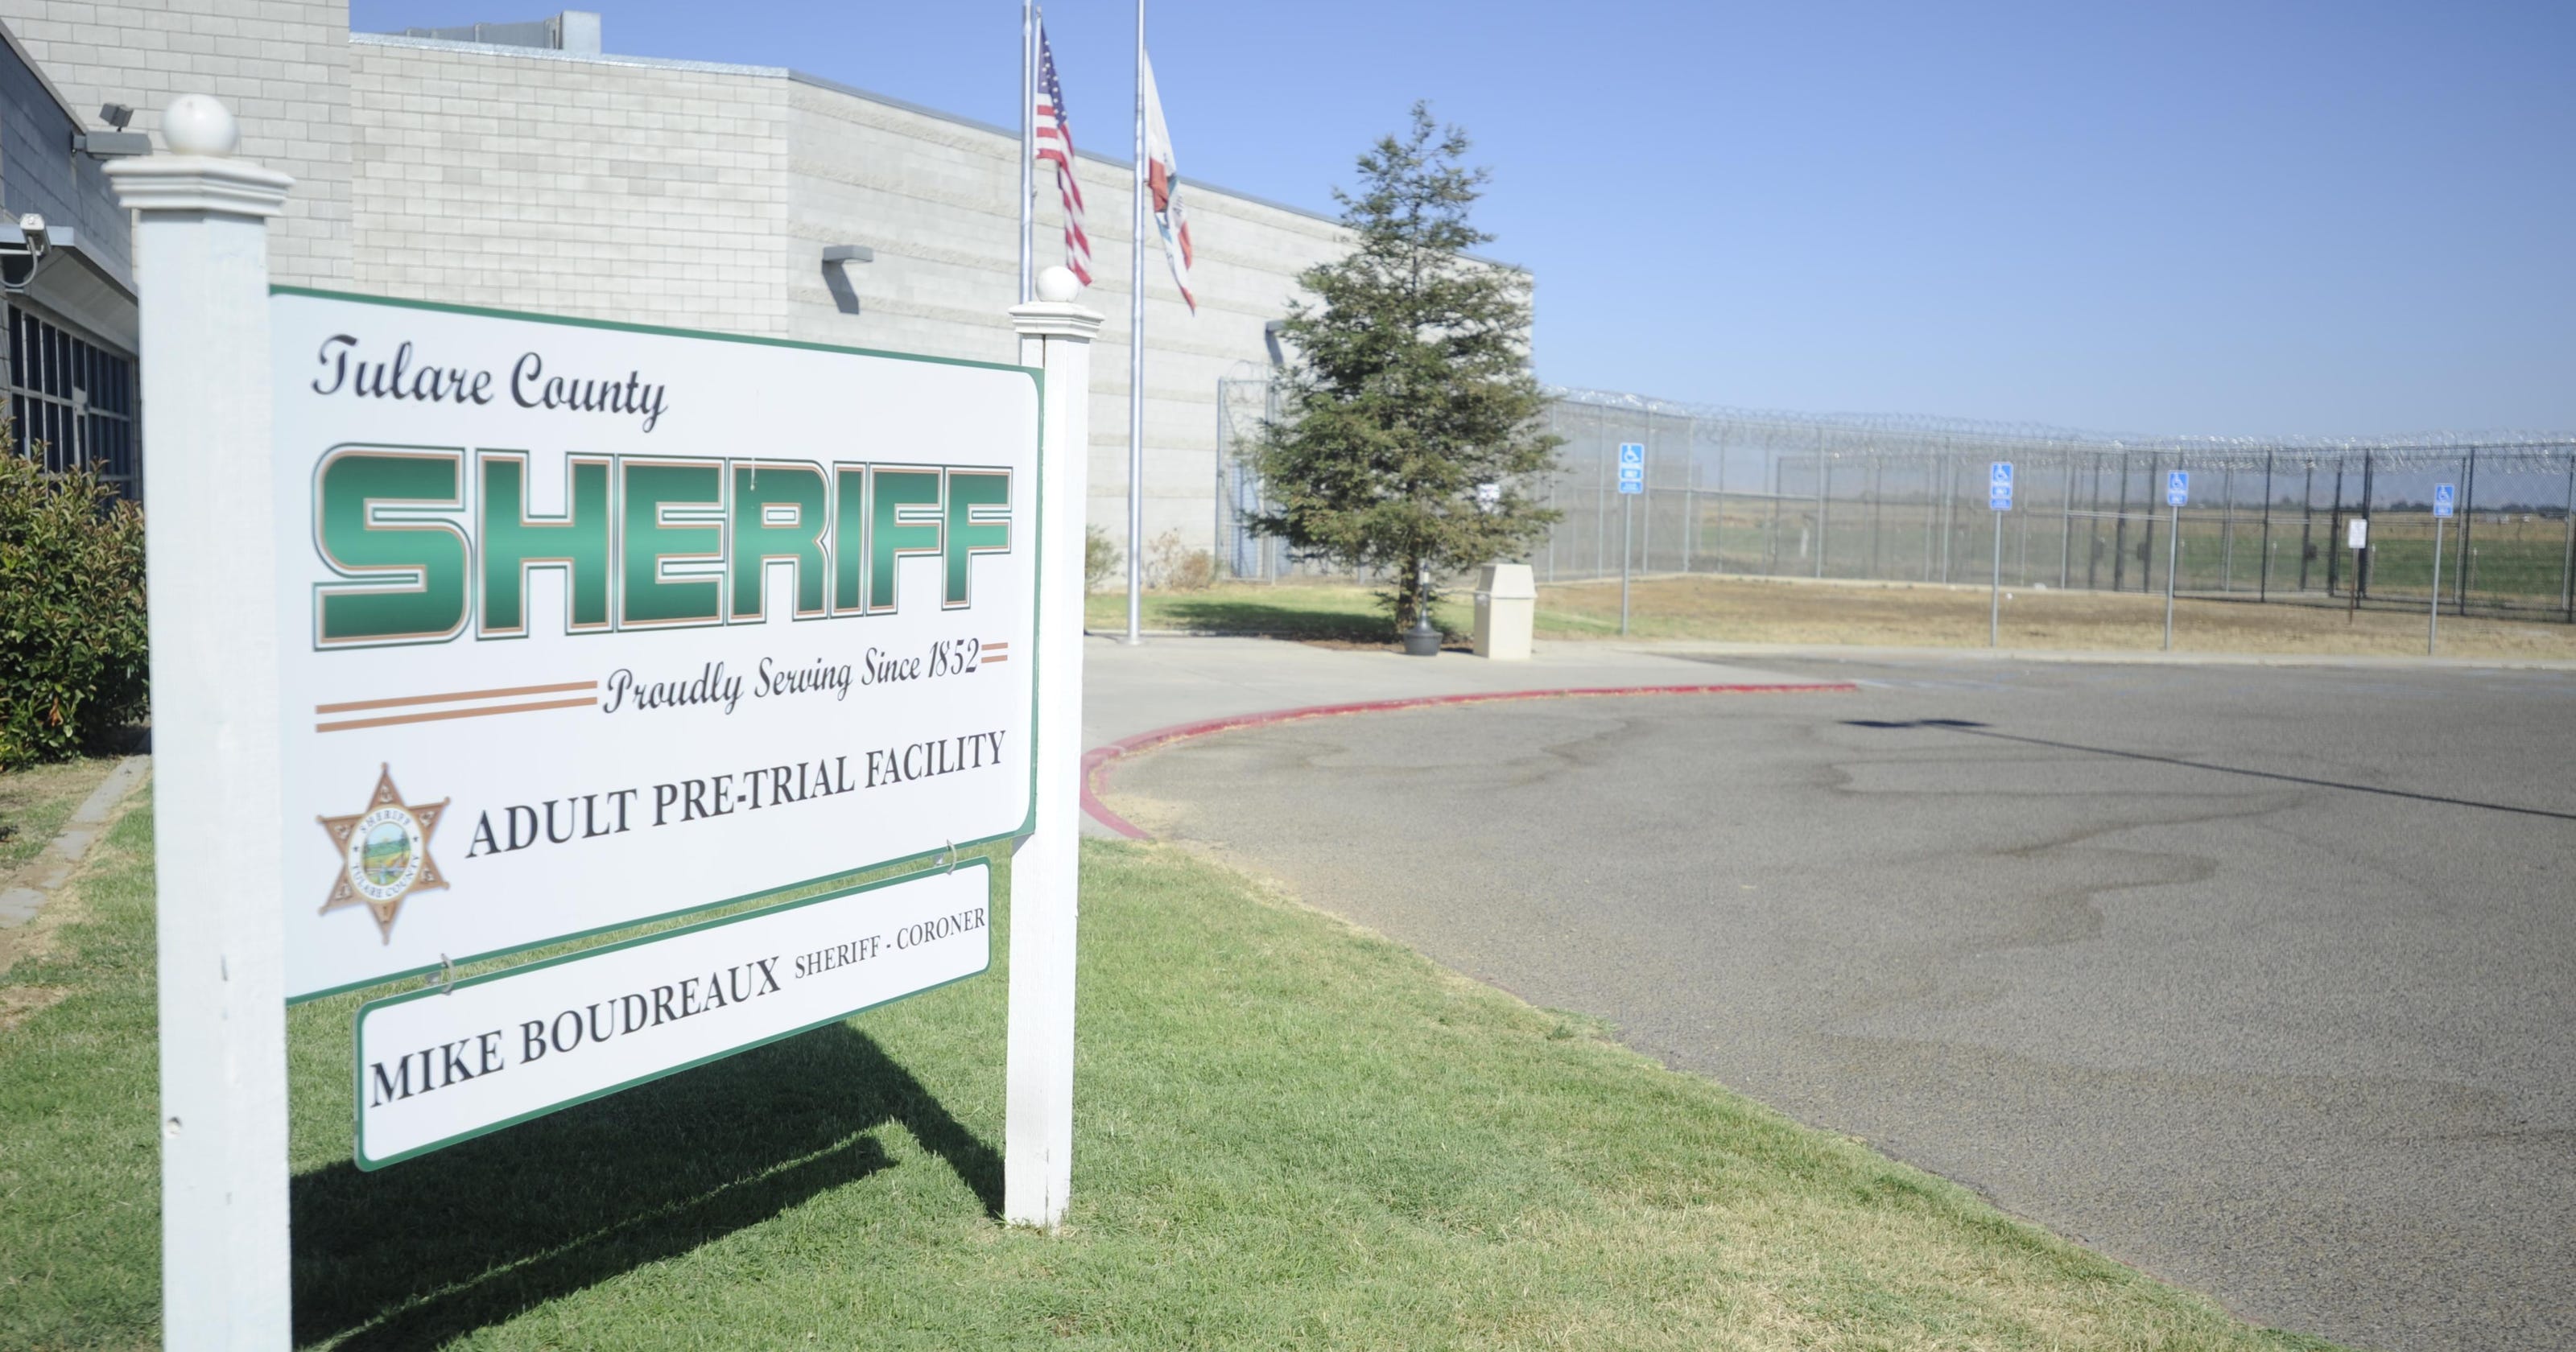 Tulare County jail population among highest in state